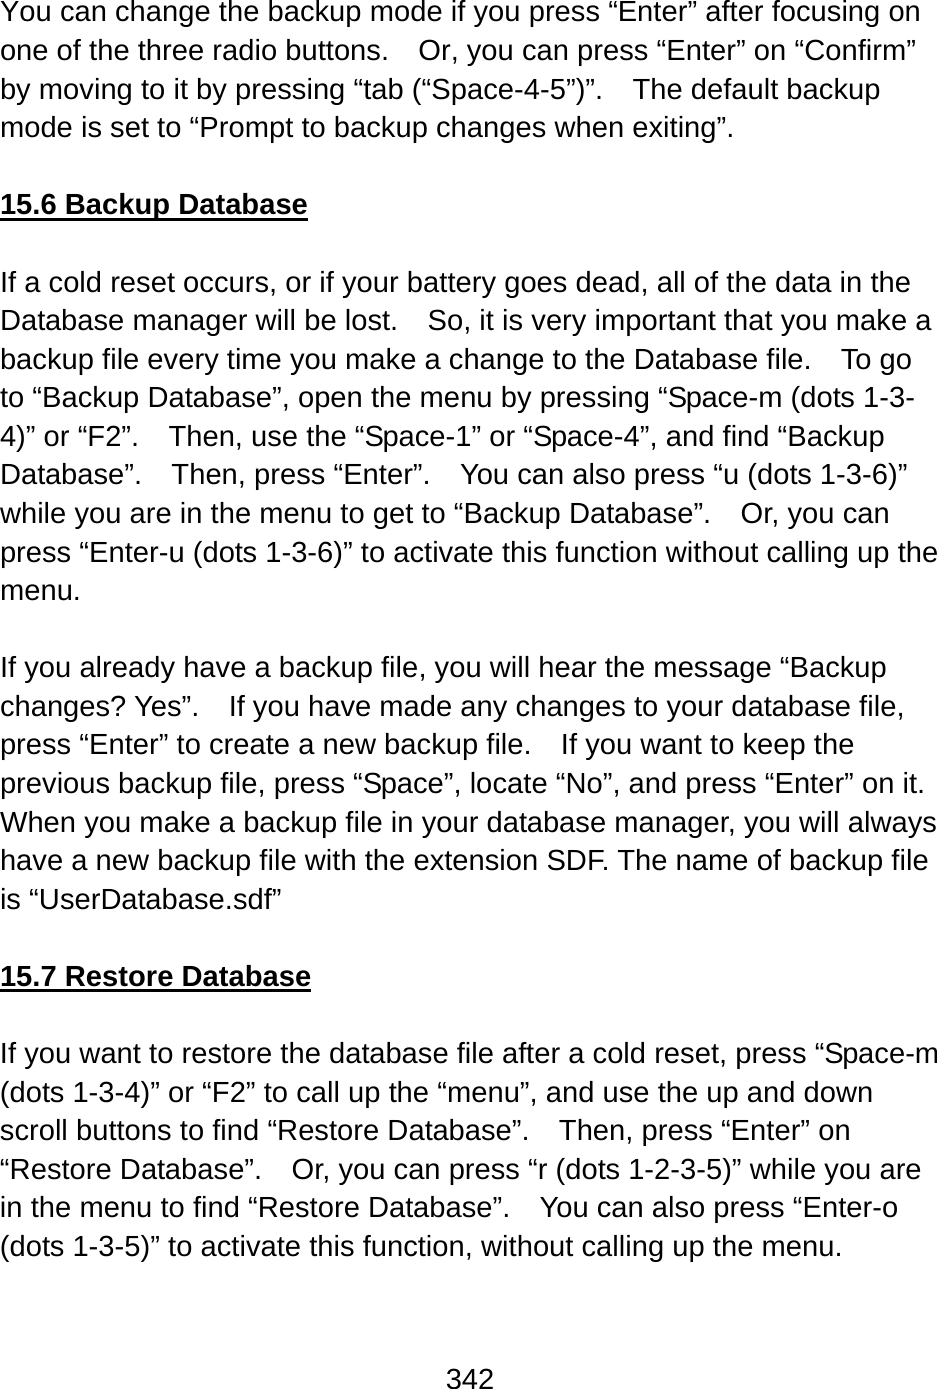 342   You can change the backup mode if you press “Enter” after focusing on one of the three radio buttons.    Or, you can press “Enter” on “Confirm” by moving to it by pressing “tab (“Space-4-5”)”.  The default backup mode is set to “Prompt to backup changes when exiting”.  15.6 Backup Database  If a cold reset occurs, or if your battery goes dead, all of the data in the Database manager will be lost.    So, it is very important that you make a backup file every time you make a change to the Database file.    To go to “Backup Database”, open the menu by pressing “Space-m (dots 1-3-4)” or “F2”.    Then, use the “Space-1” or “Space-4”, and find “Backup Database”.  Then, press “Enter”.  You can also press “u (dots 1-3-6)” while you are in the menu to get to “Backup Database”.    Or, you can press “Enter-u (dots 1-3-6)” to activate this function without calling up the menu.  If you already have a backup file, you will hear the message “Backup changes? Yes”.  If you have made any changes to your database file, press “Enter” to create a new backup file.    If you want to keep the previous backup file, press “Space”, locate “No”, and press “Enter” on it.   When you make a backup file in your database manager, you will always have a new backup file with the extension SDF. The name of backup file is “UserDatabase.sdf”  15.7 Restore Database  If you want to restore the database file after a cold reset, press “Space-m (dots 1-3-4)” or “F2” to call up the “menu”, and use the up and down scroll buttons to find “Restore Database”.    Then, press “Enter” on “Restore Database”.    Or, you can press “r (dots 1-2-3-5)” while you are in the menu to find “Restore Database”.  You can also press “Enter-o (dots 1-3-5)” to activate this function, without calling up the menu.  